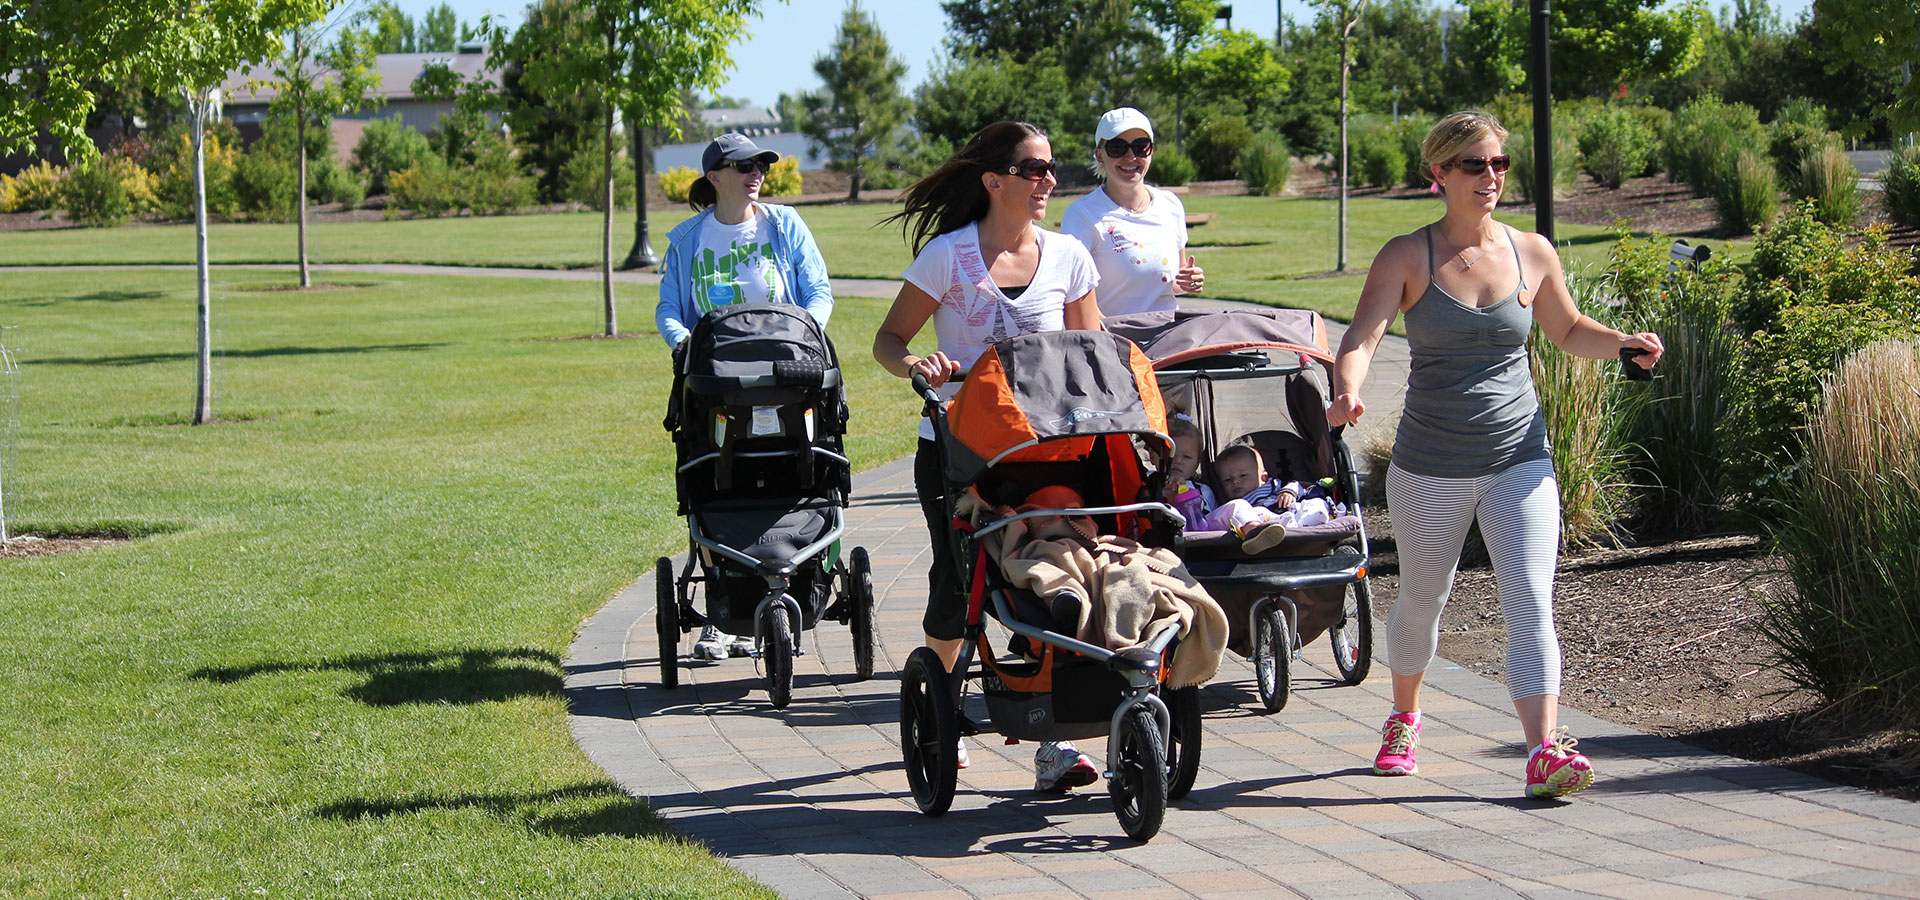 Women walking with strollers at Riverbend Park.